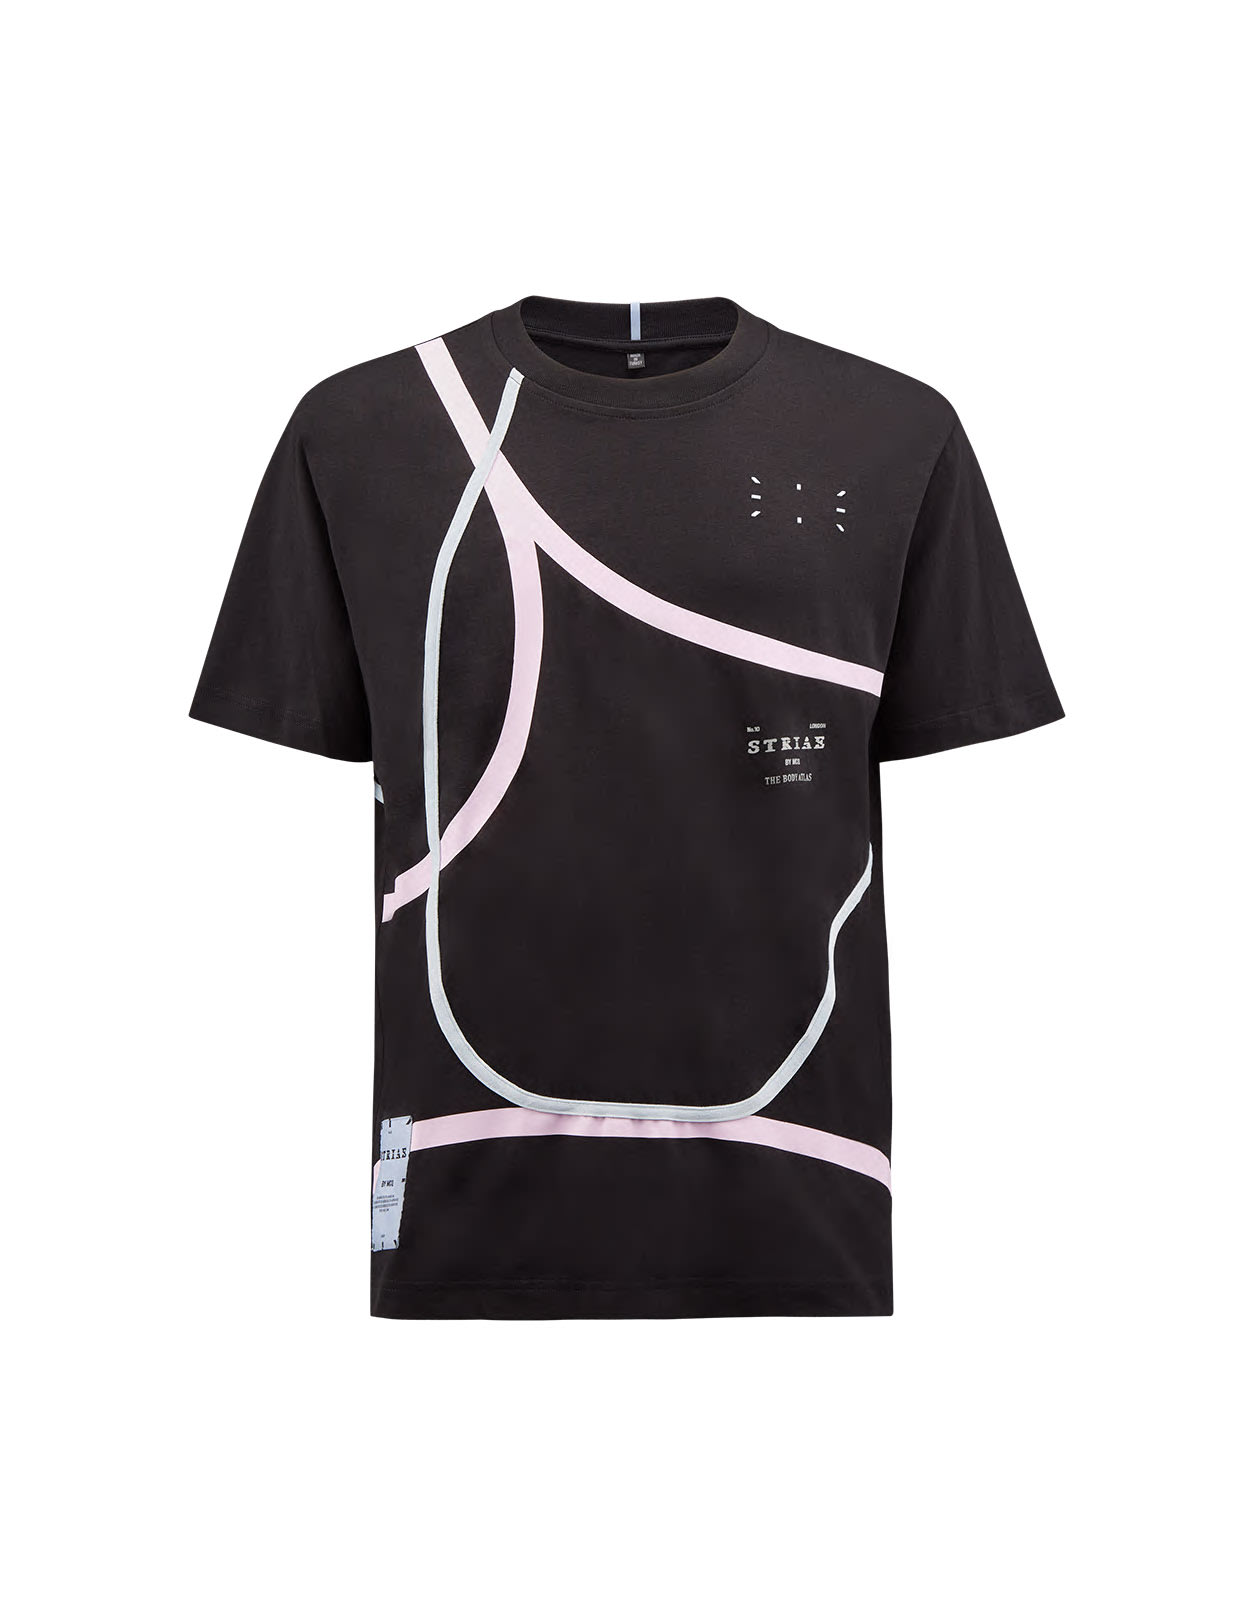 McQ Alexander McQueen Man Black T-shirt With Decorative Prints And Stitching